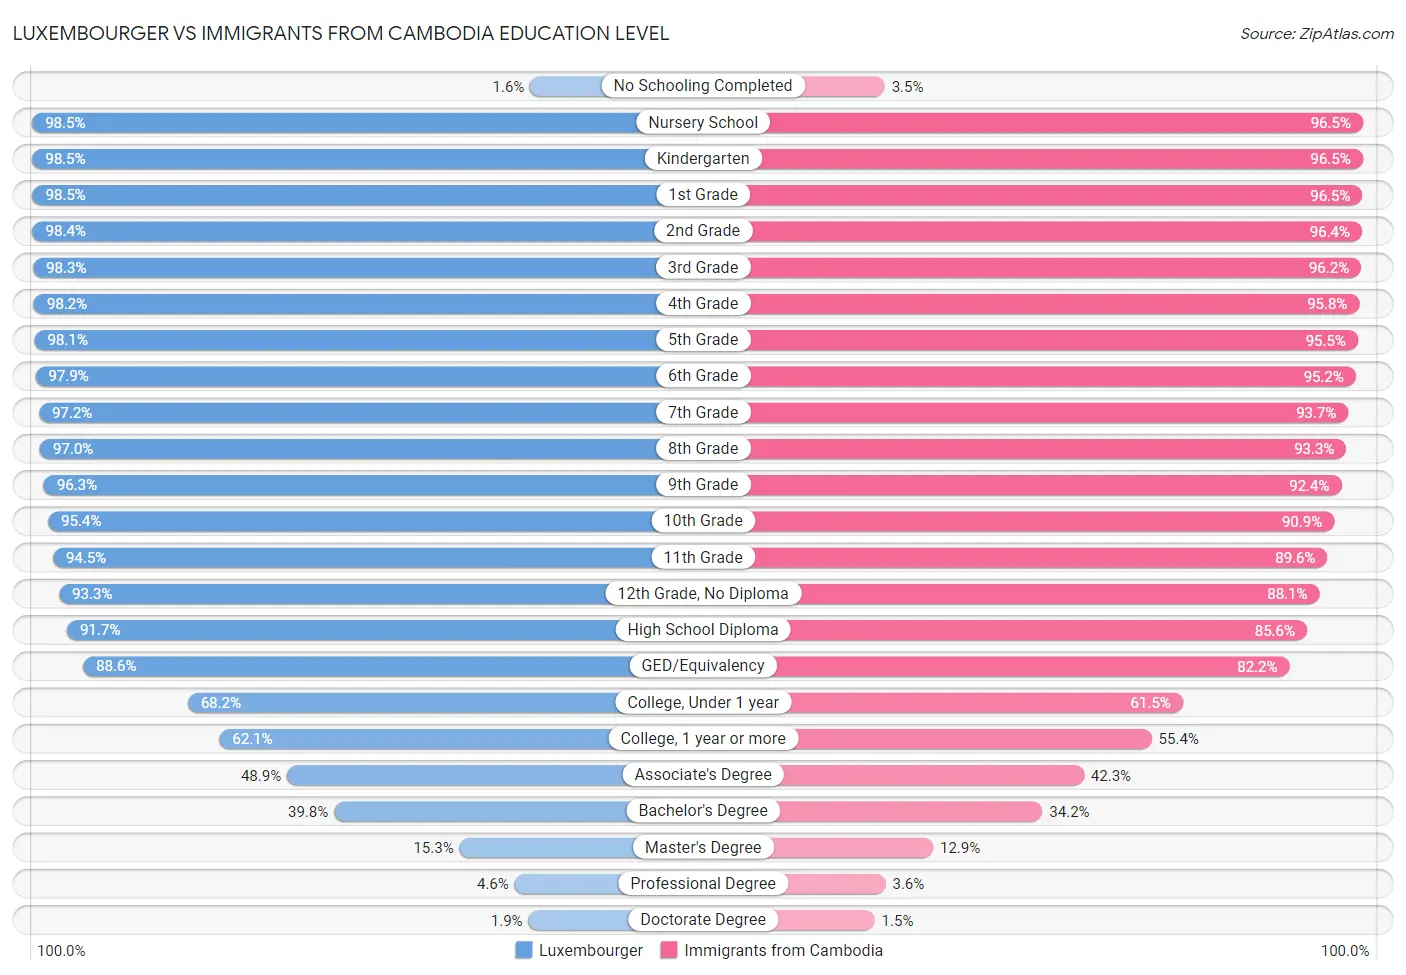 Luxembourger vs Immigrants from Cambodia Education Level